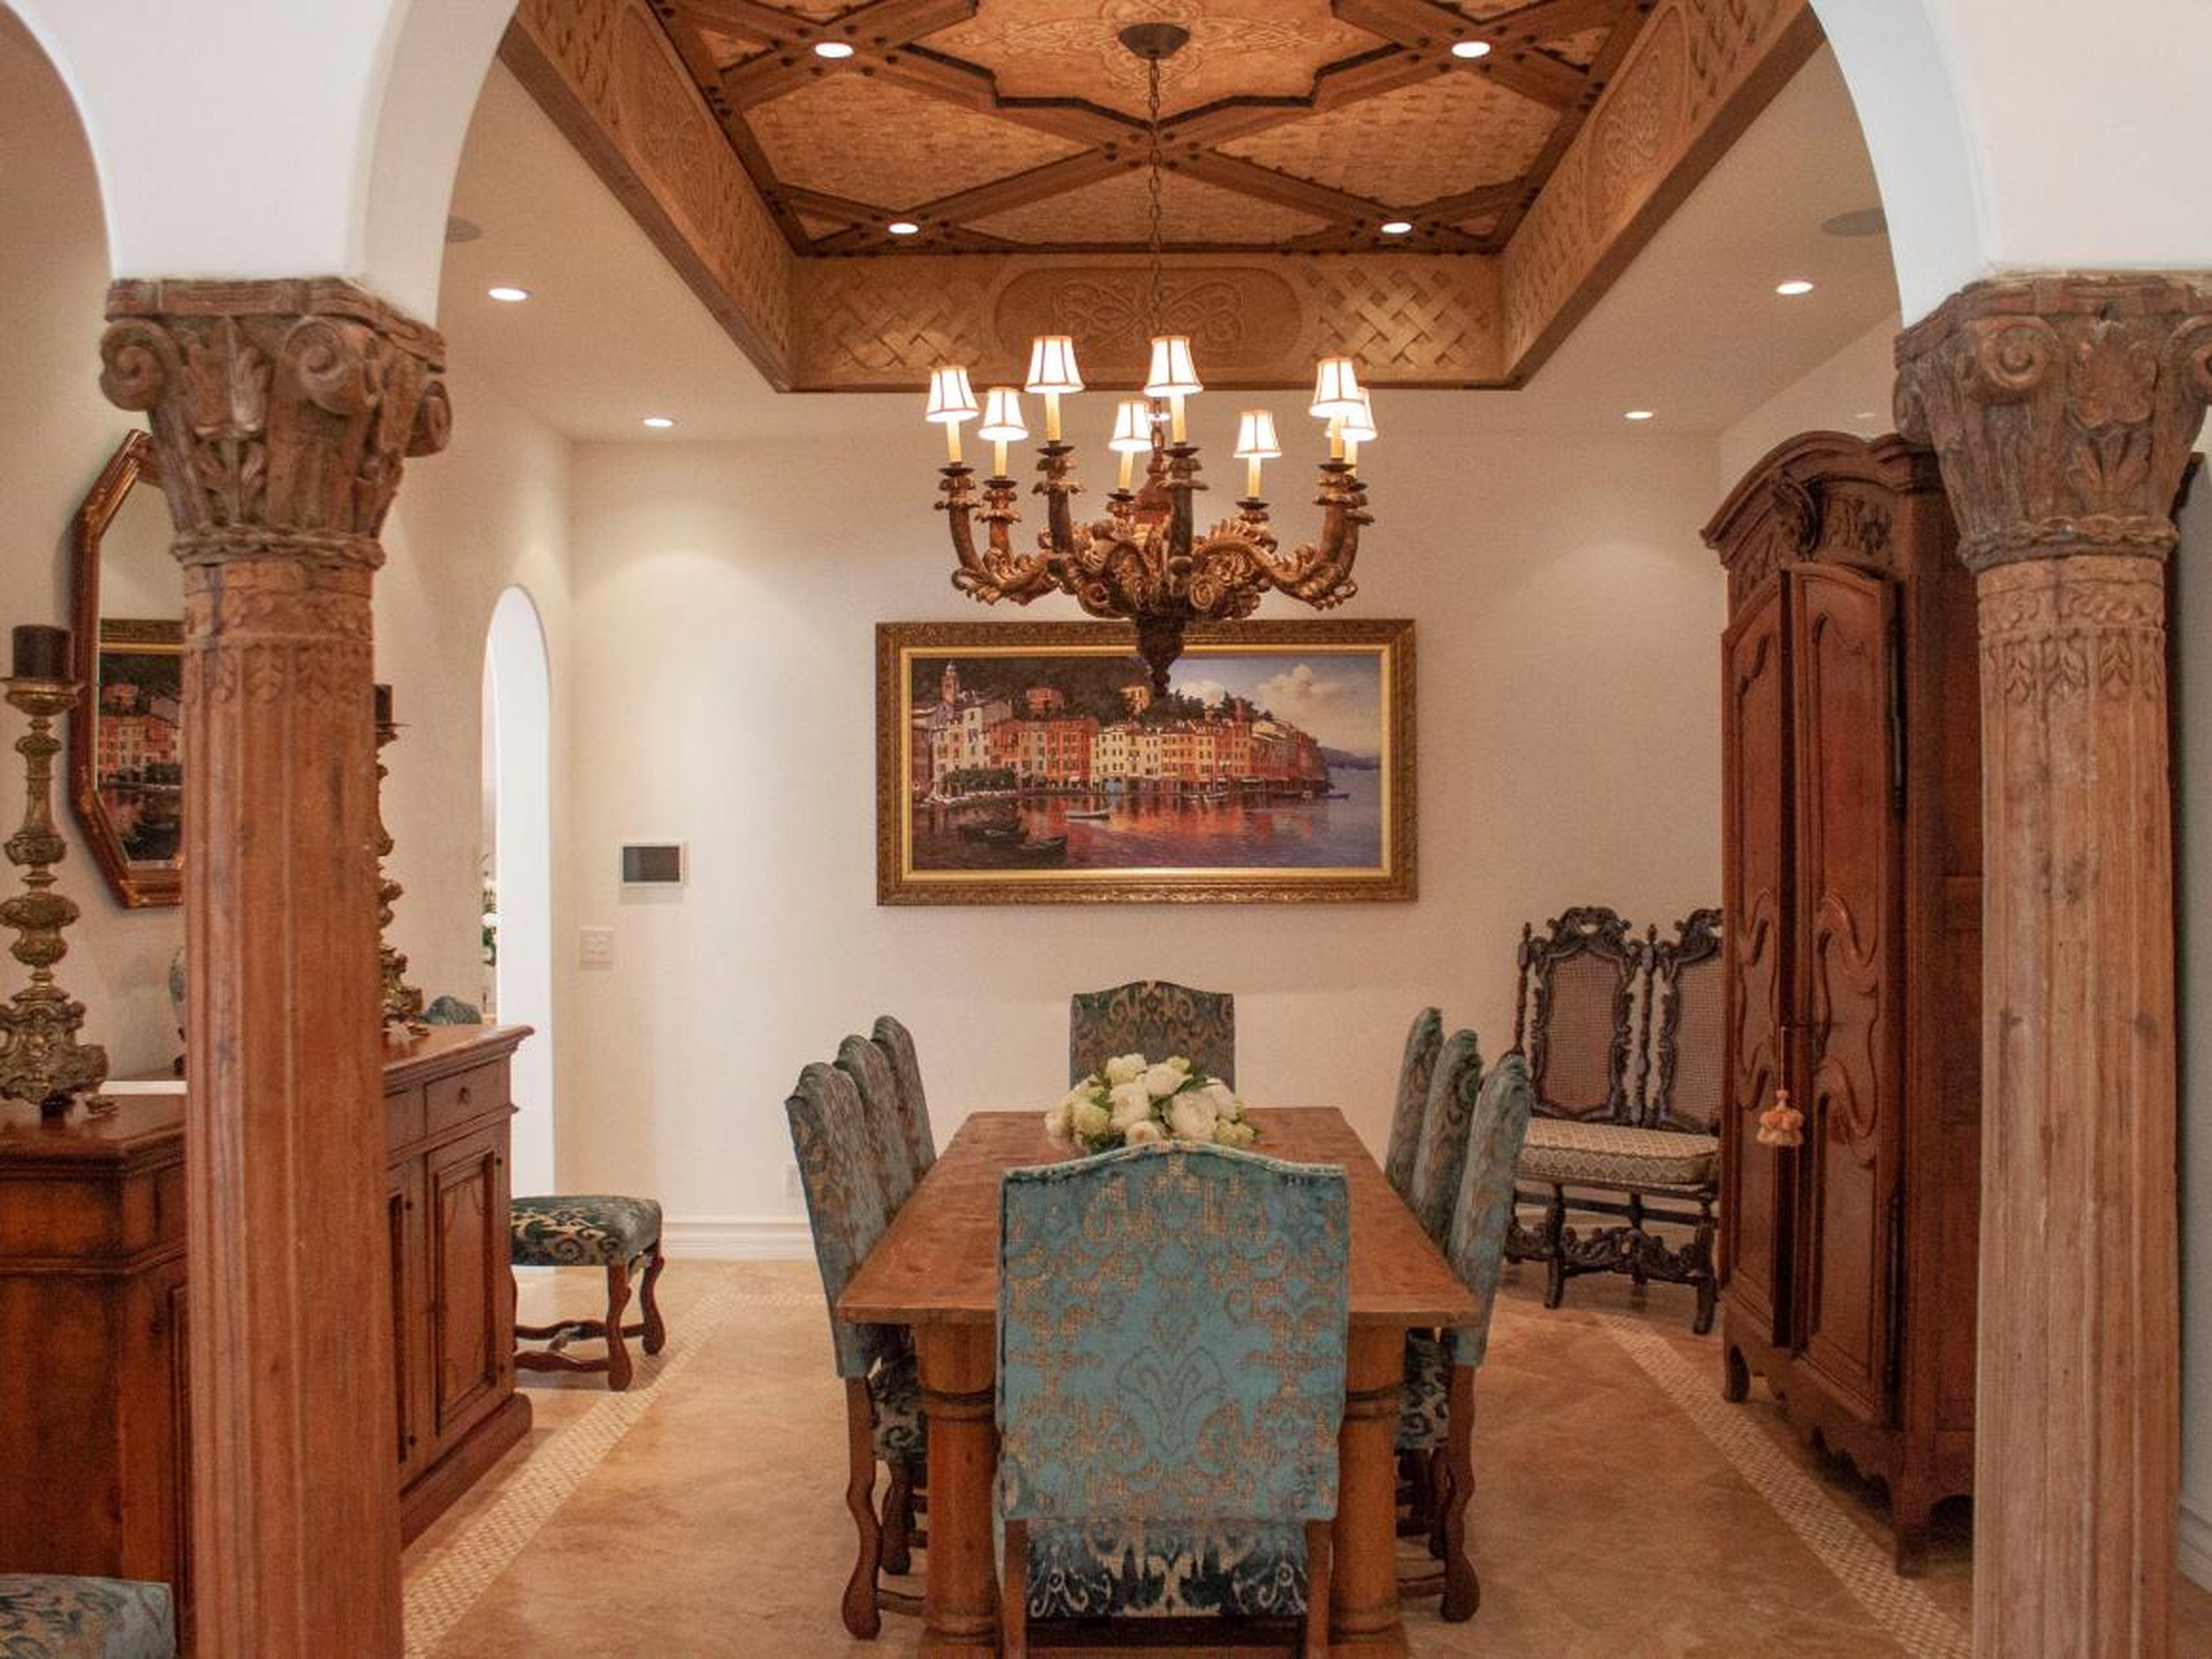 The formal dining room includes intricate wood detailing and a painting of Italy.